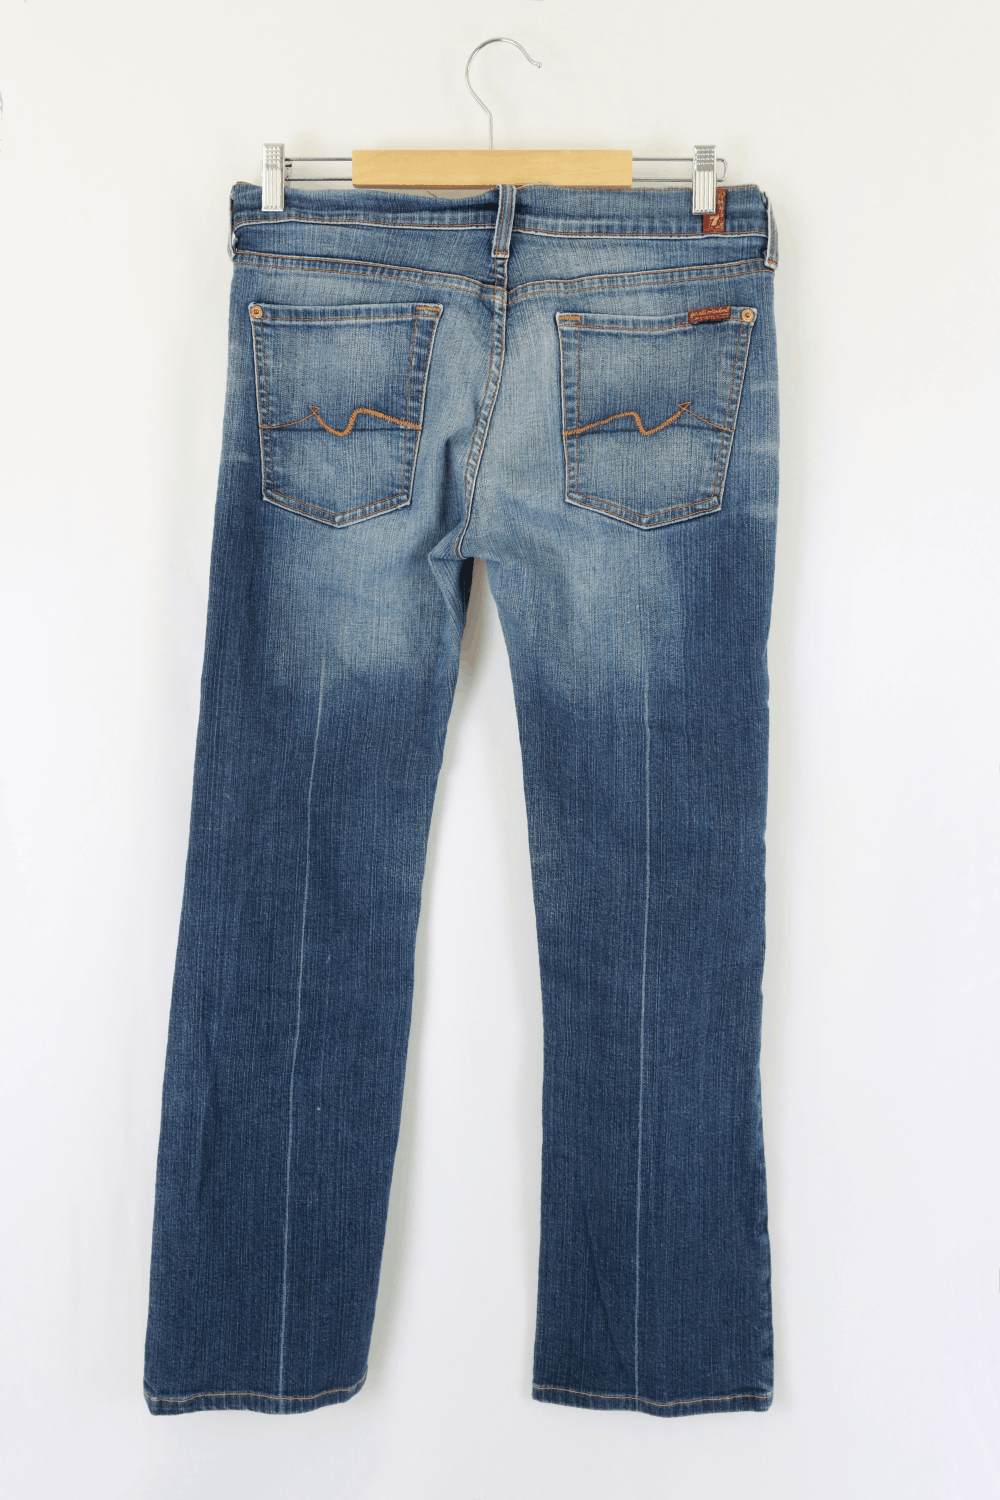 7 For All Mankind Blue Jeans 32 (AU14)